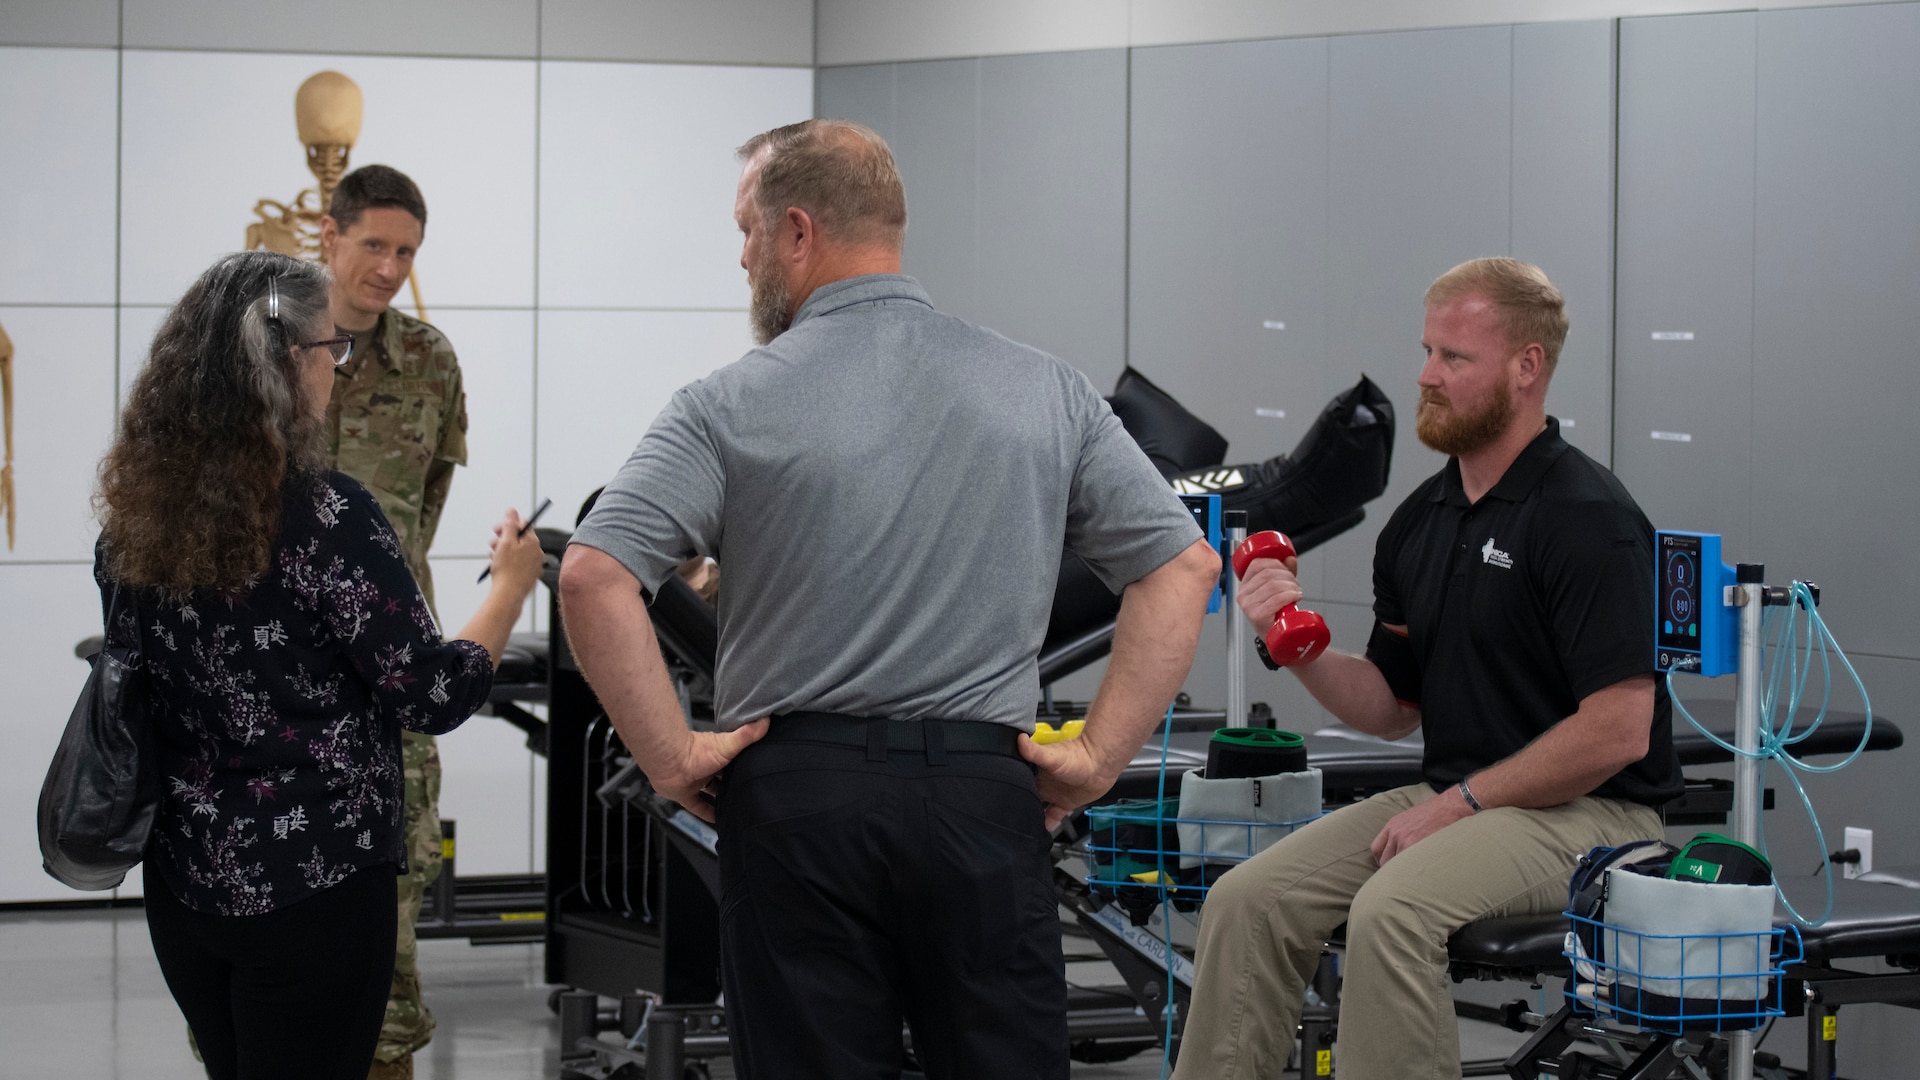 Dr. Wendy Walsh (left), Air Education and Training Command chief learning officer, observes Mr. Tyler Christiansen (right), Special Warfare Human Performance Support Group human performance director, conduct a blood flow restriction exercise with Dr. Joseph Kirkman (center), Special Warfare Operational Medicine Squadron supervisory physical therapist, at the Special Warfare Training Wing Human Performance Training Center on Joint Base San Antonio-Chapman Training Annex, Texas, April 5, 2022. Dr. Walsh and her team participated in an immersion tour of the SWTW to learn about how the SWTW builds Air Force Special Warfare Airmen and prepares them for combat.